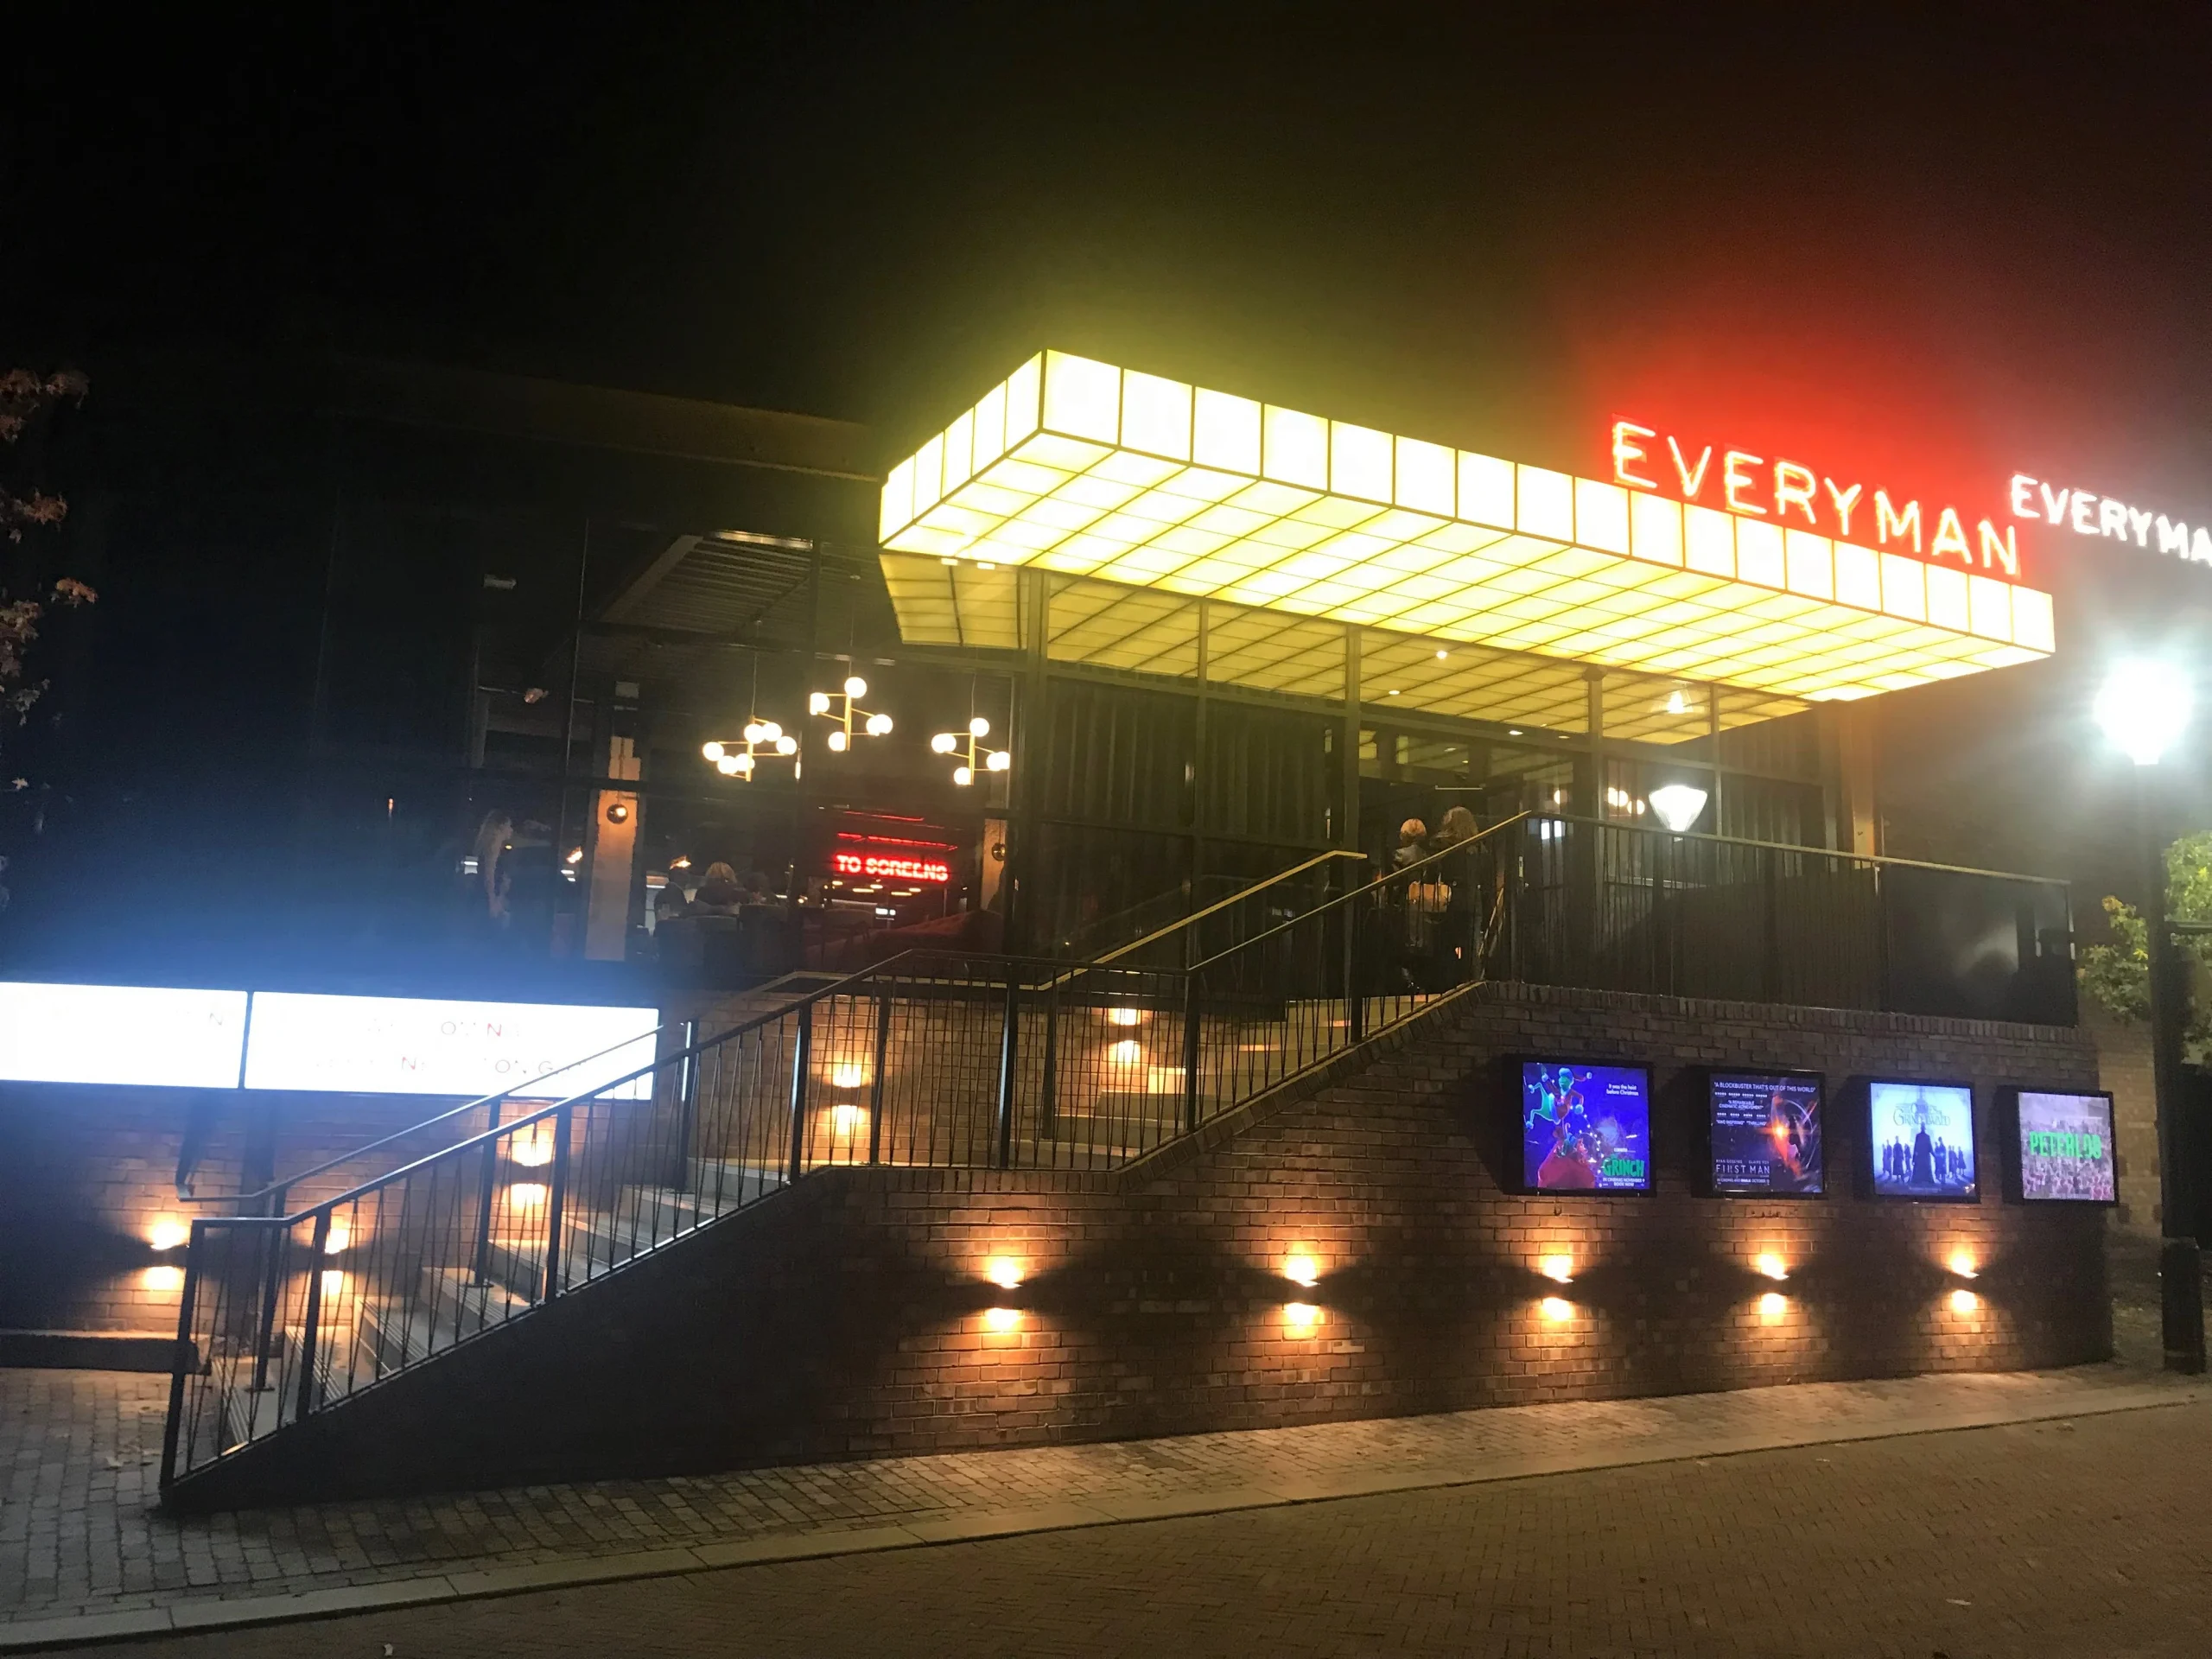 The Farrat team takes a tour of the new Everyman Cinema site in Altrincham